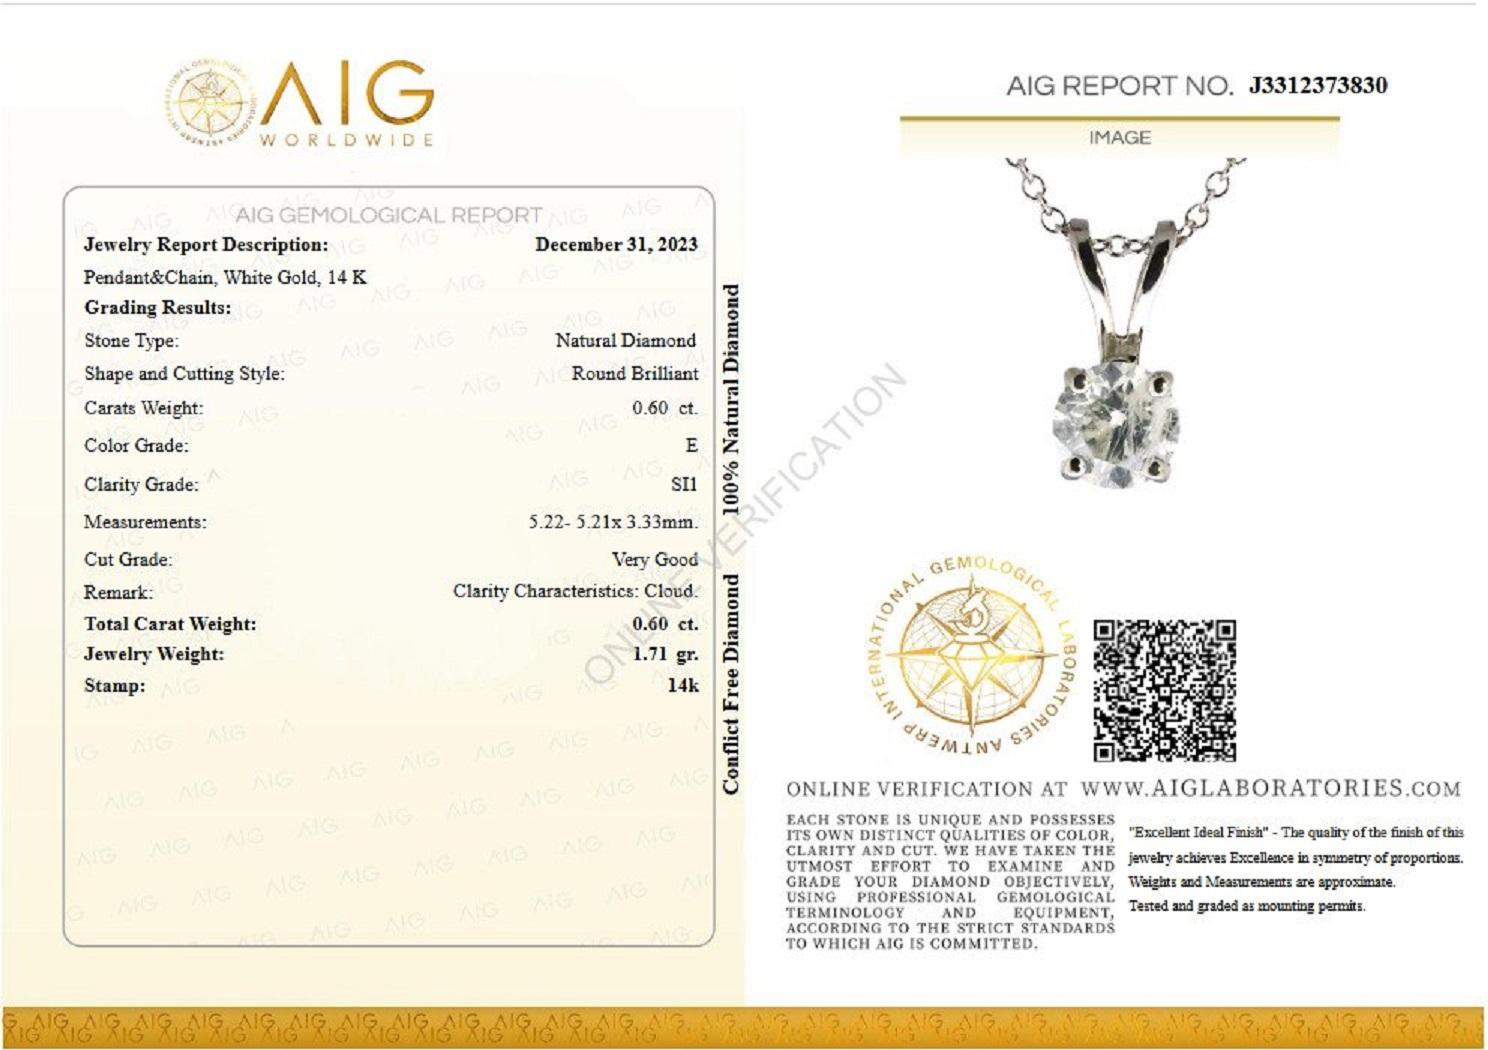 Necklace Length: 41 cm

Center Stone:
___________
Natural Diamond
Cut: Round Brilliant
Carat: 0.60 carat
Color: E
Clarity: SI1
Clarity Characteristics: Cloud

VAT and TAXES:
Please be aware that your country of residence may impose customs and